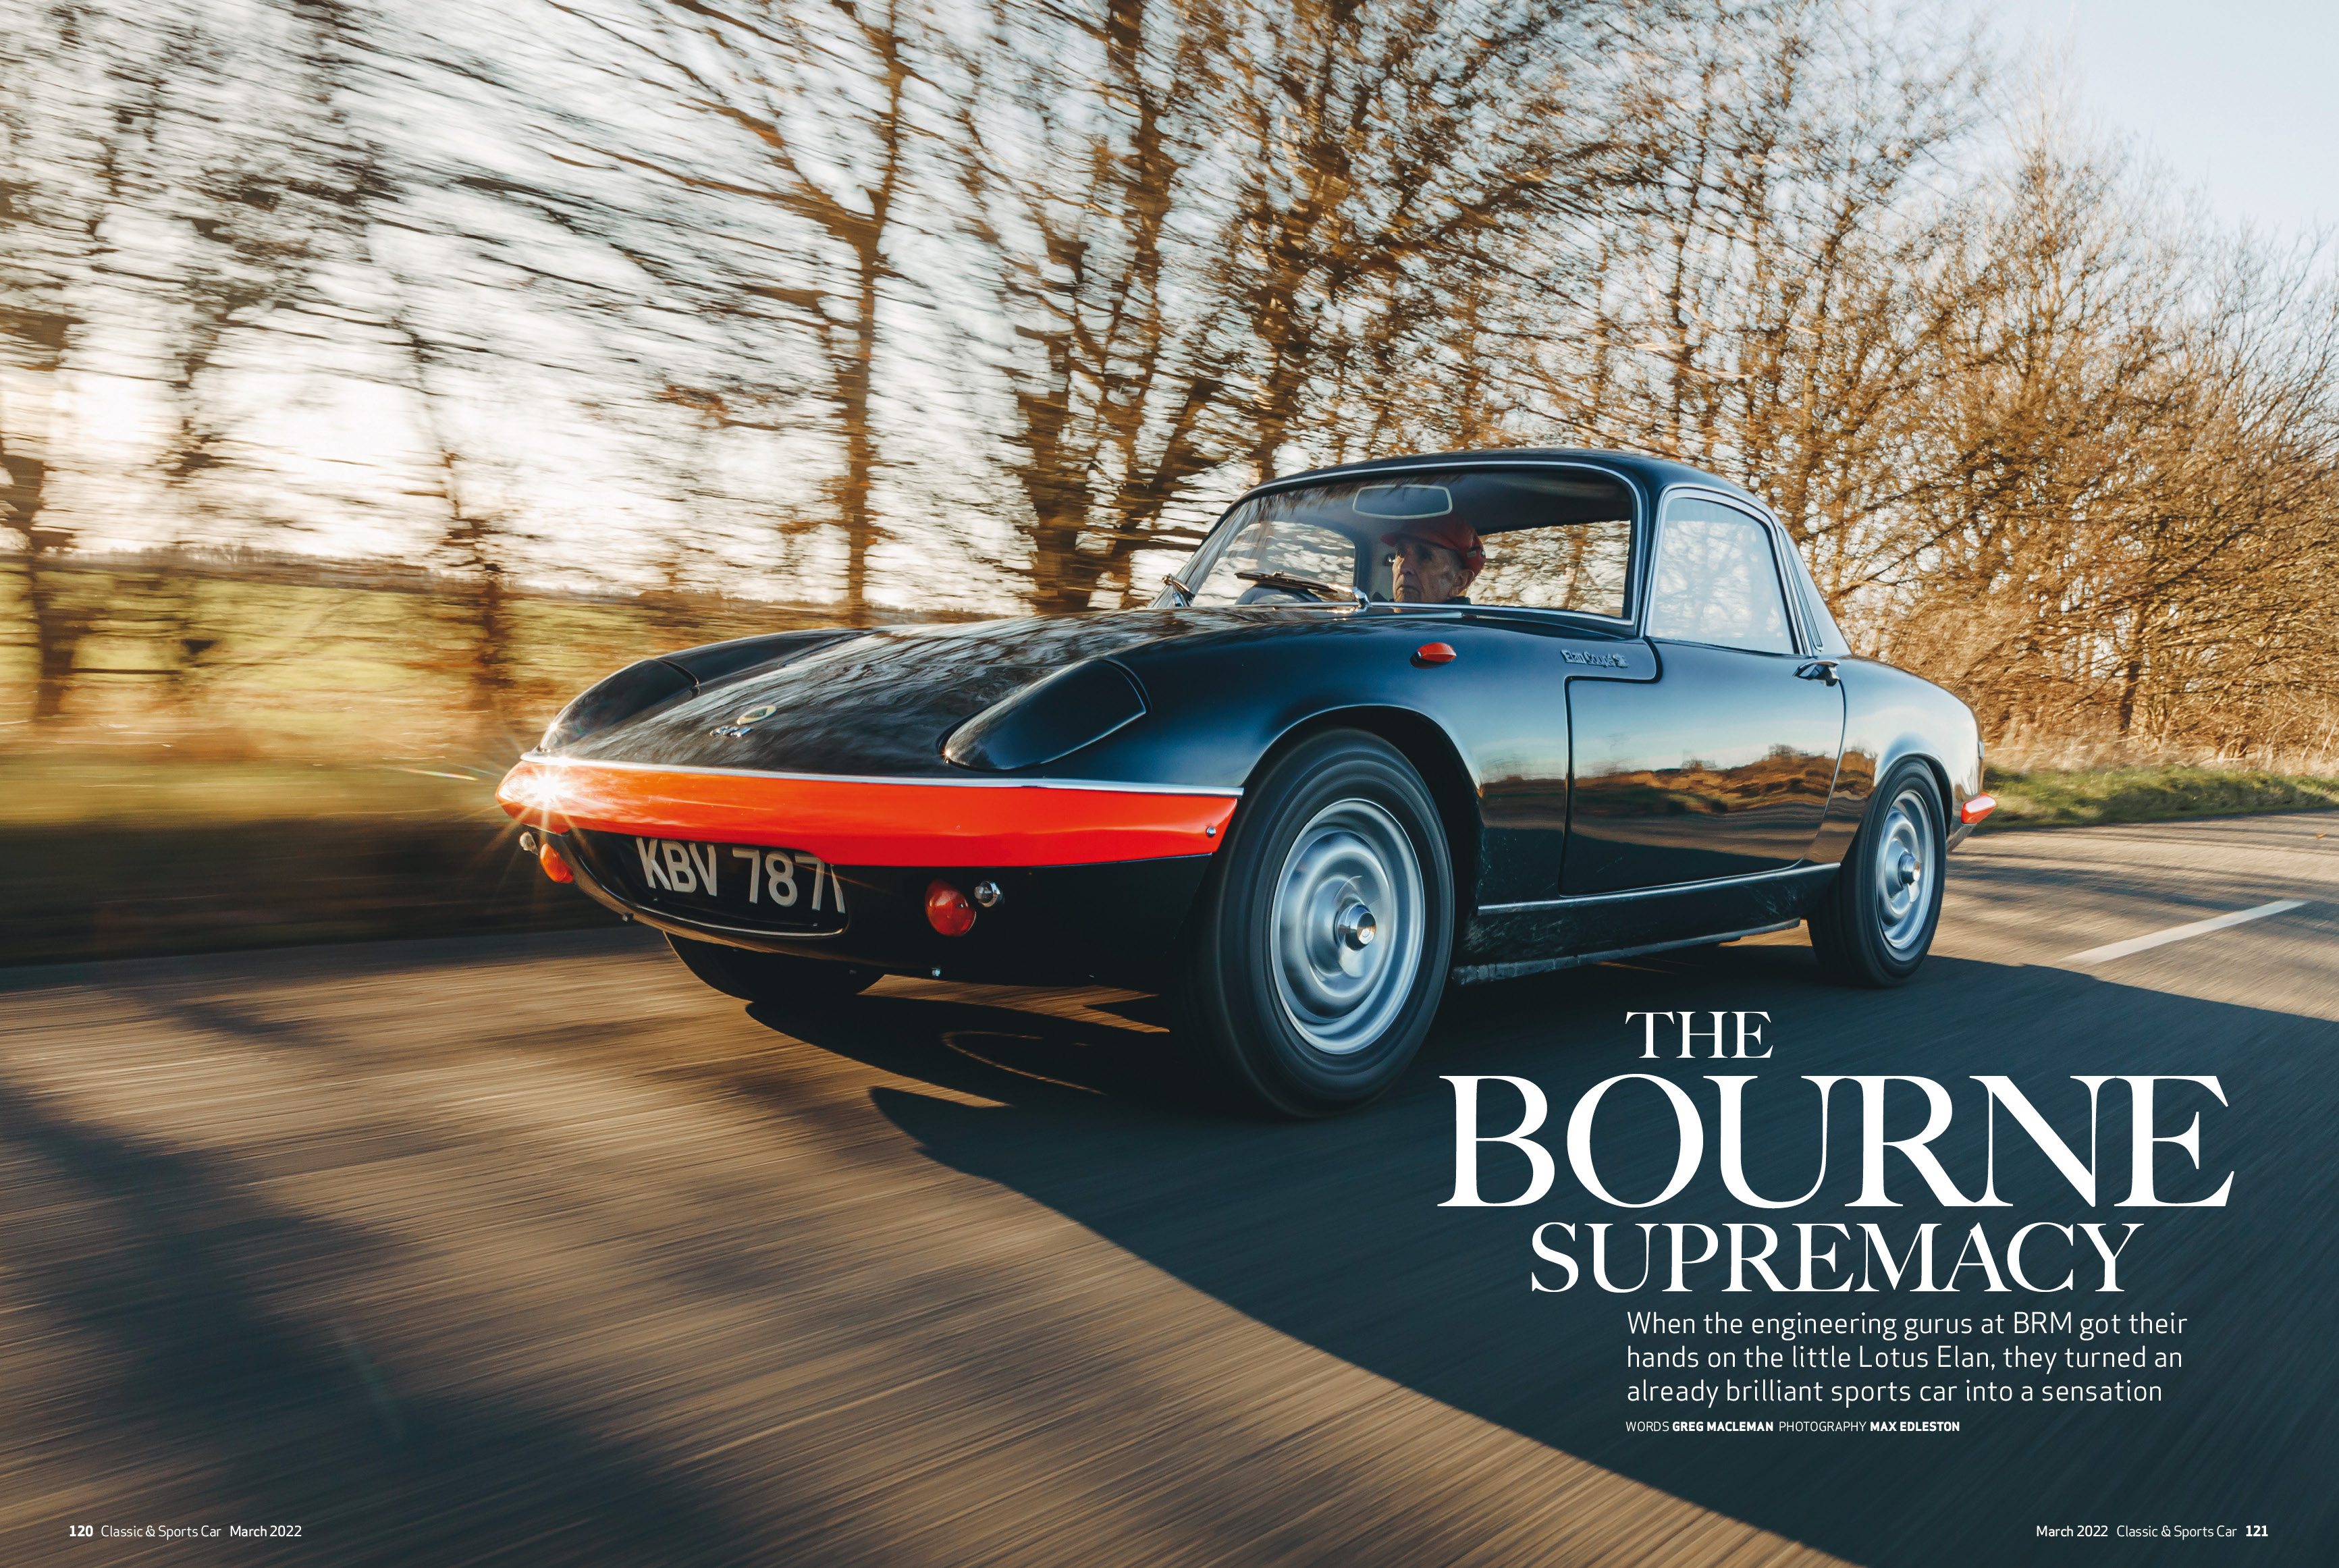 Classic & Sports Car – Rally giants: inside the March 2022 issue of C&SC